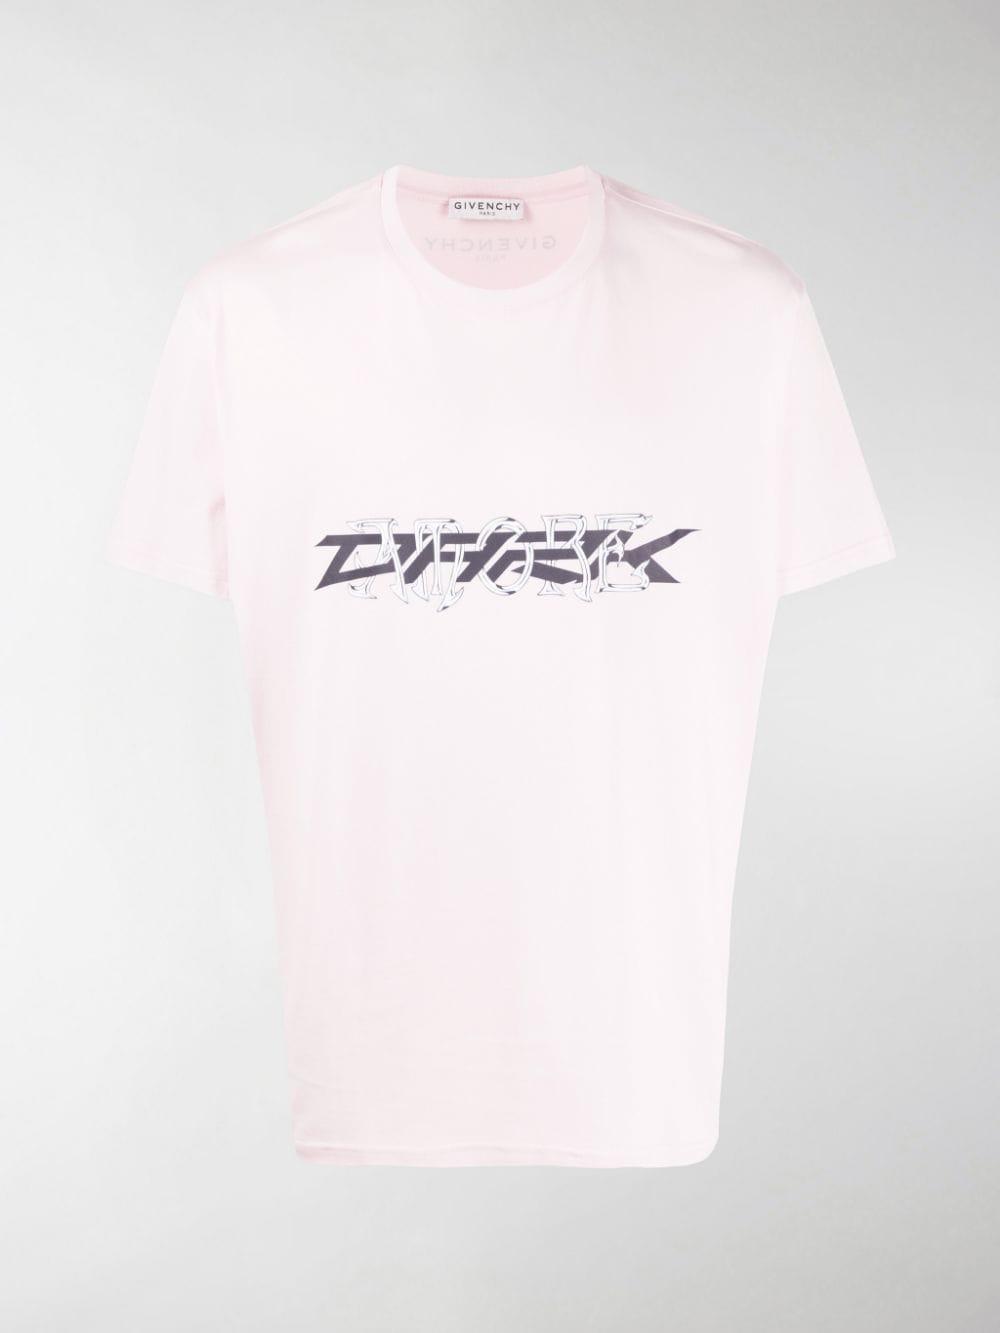 Givenchy Dark Amore T-shirt in Pink for Men - Save 21% - Lyst